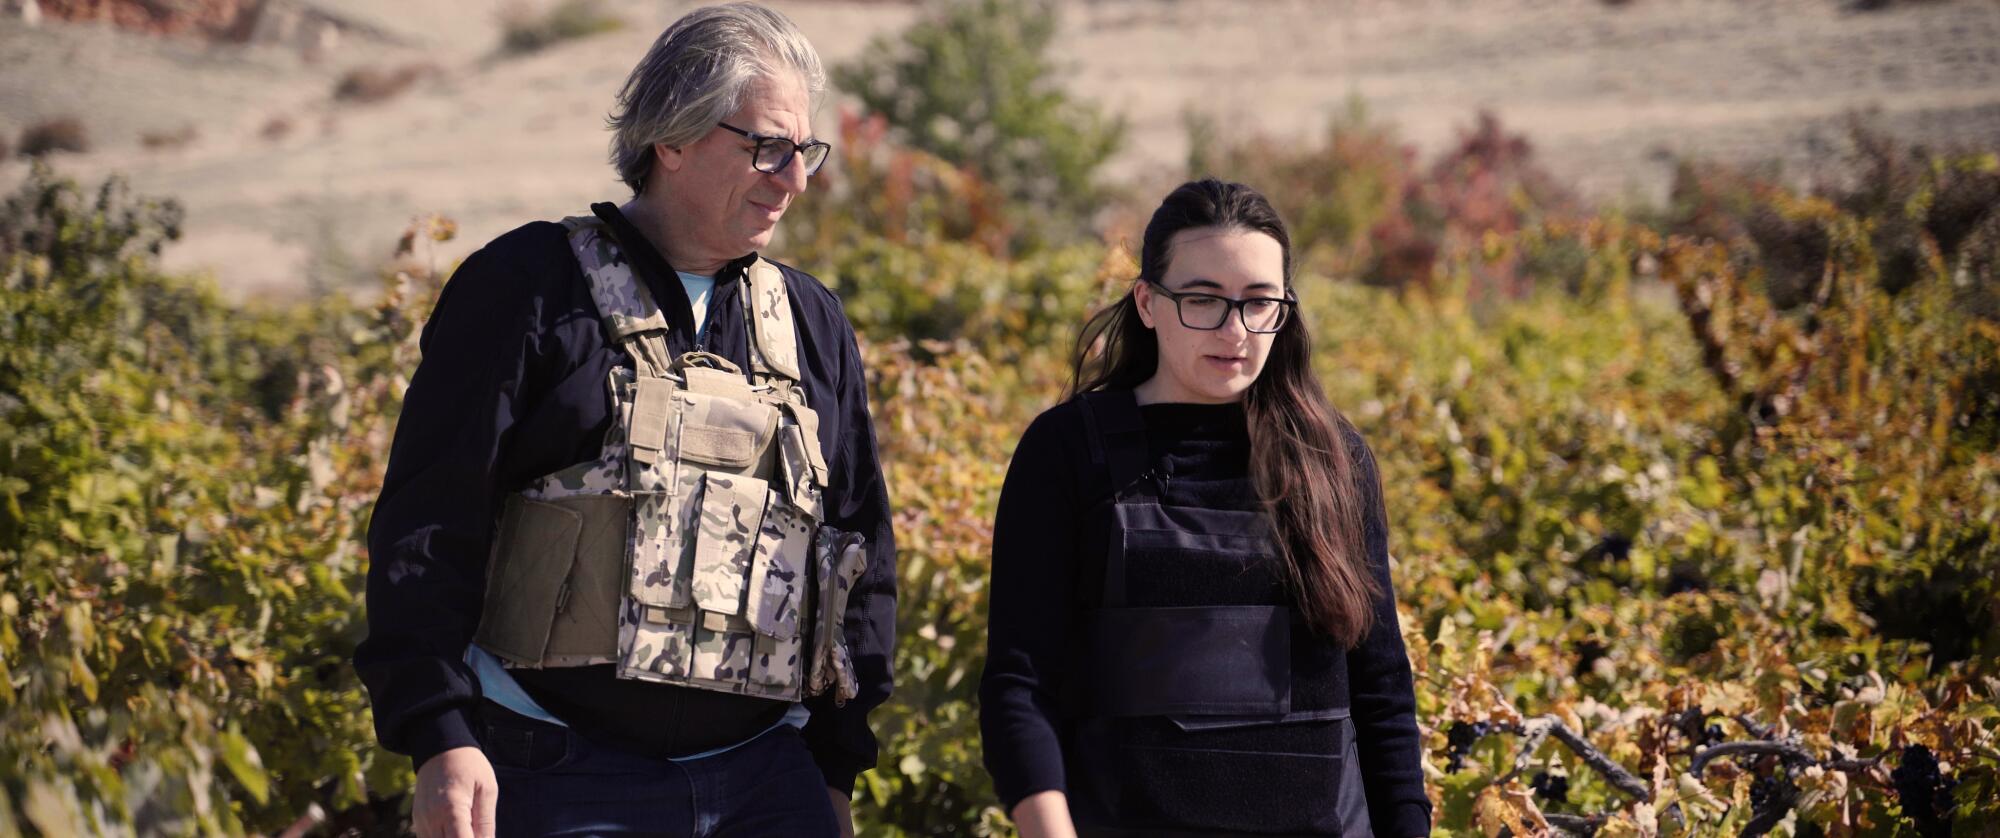 A father and daughter in bulletproof vests walk in their vineyard.